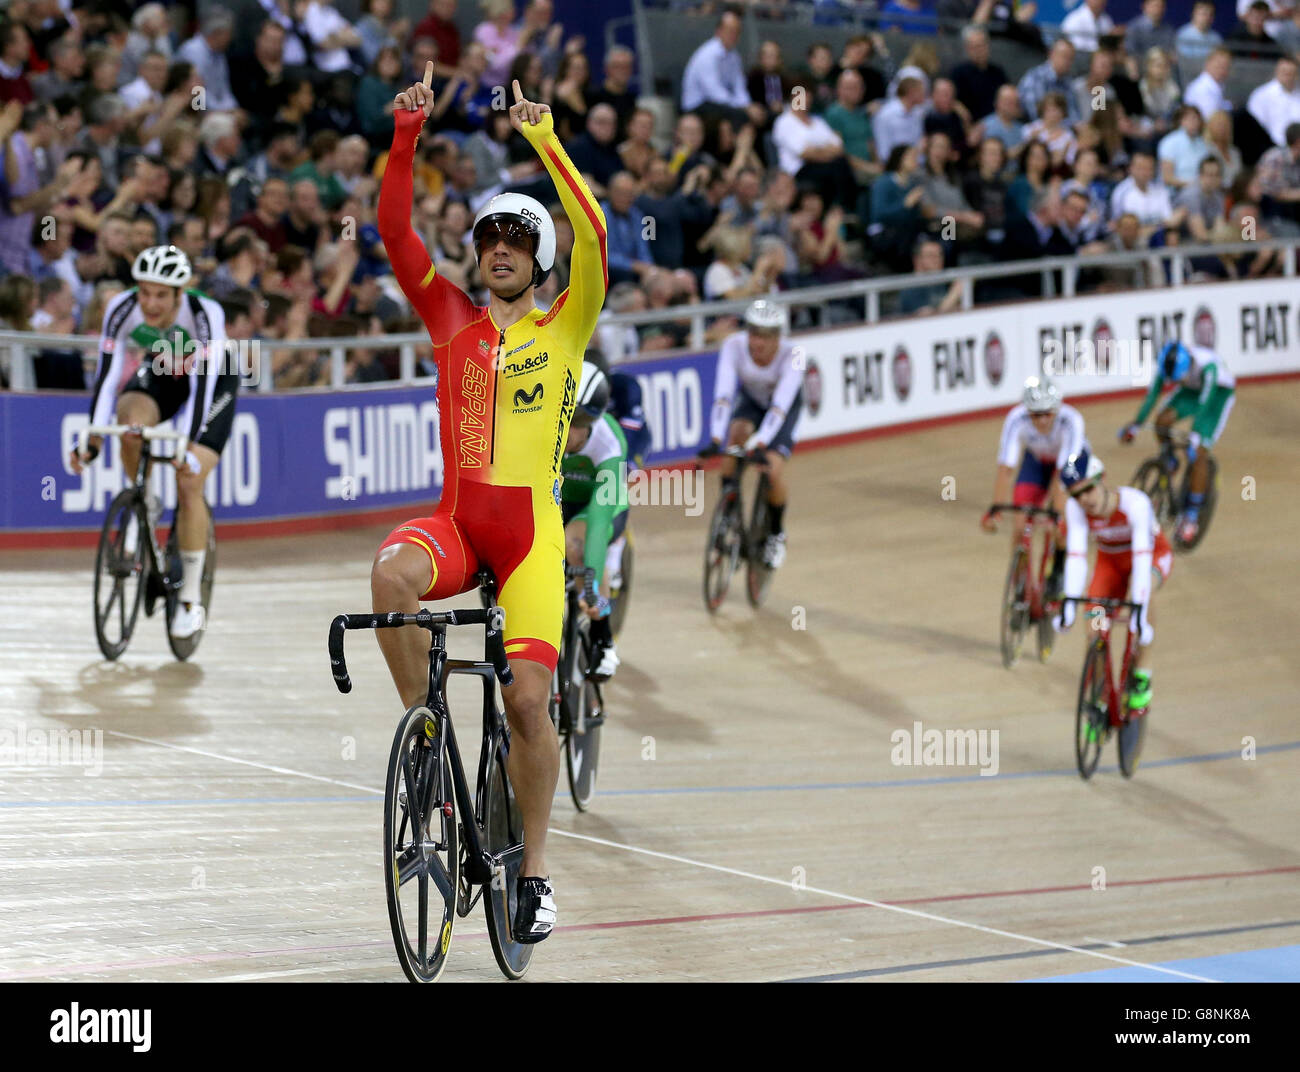 Spain's Sebastian Mora Vedri celebrates winning the Men's Scratch Race final during day one of the UCI Track Cycling World Championships at Lee Valley VeloPark, London. Stock Photo